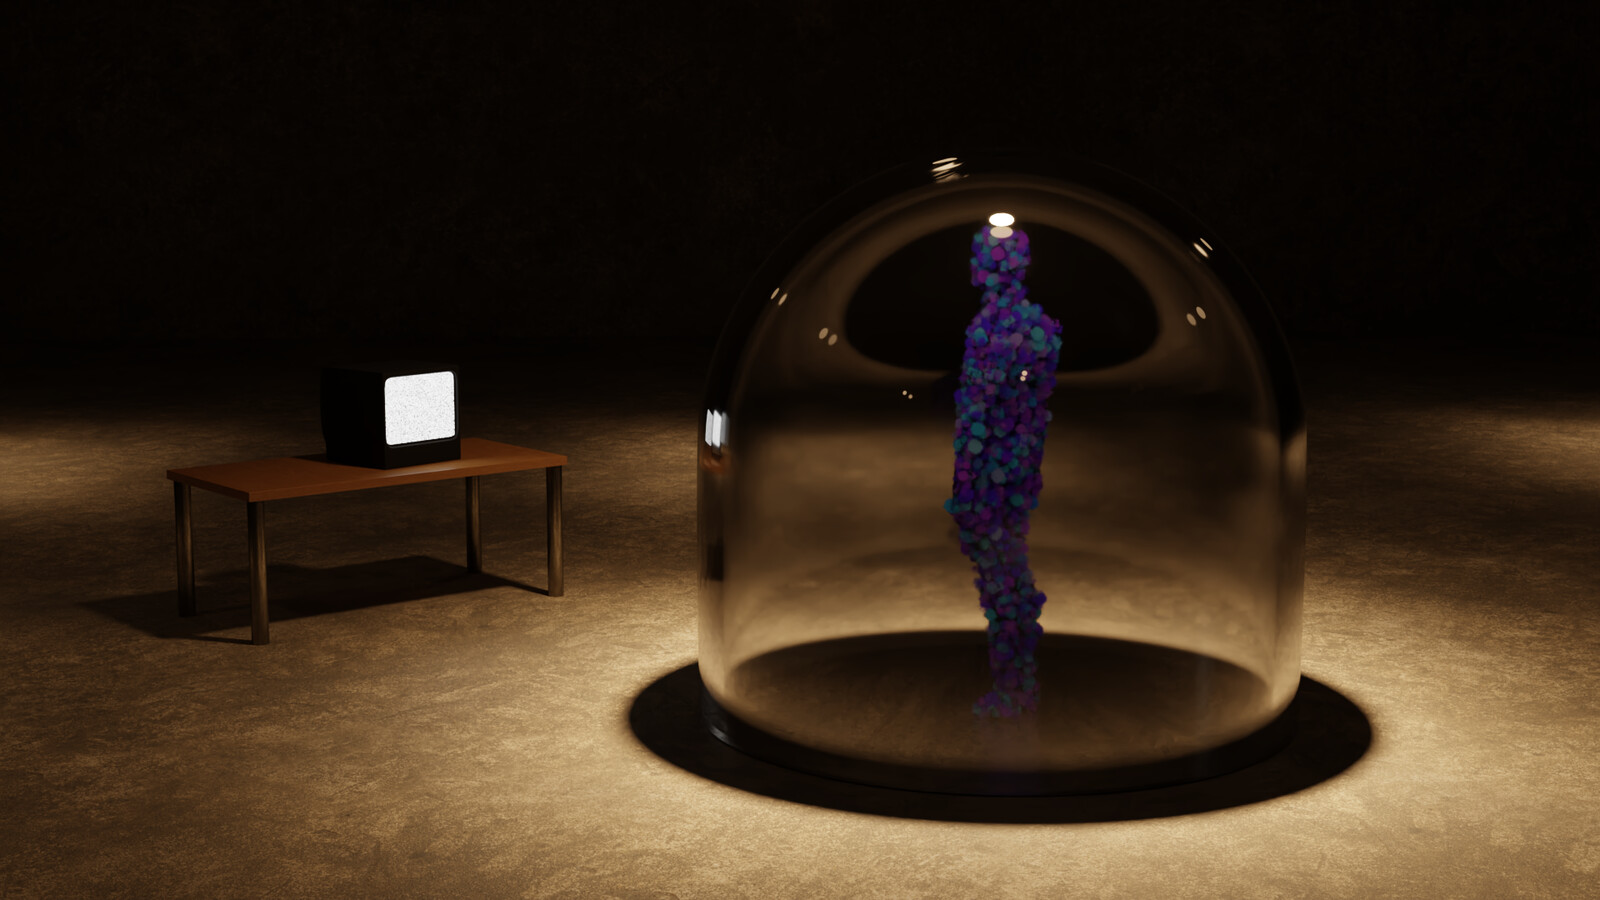 An SCP-style humanoid watching a staticky TV from a glass containment unit.